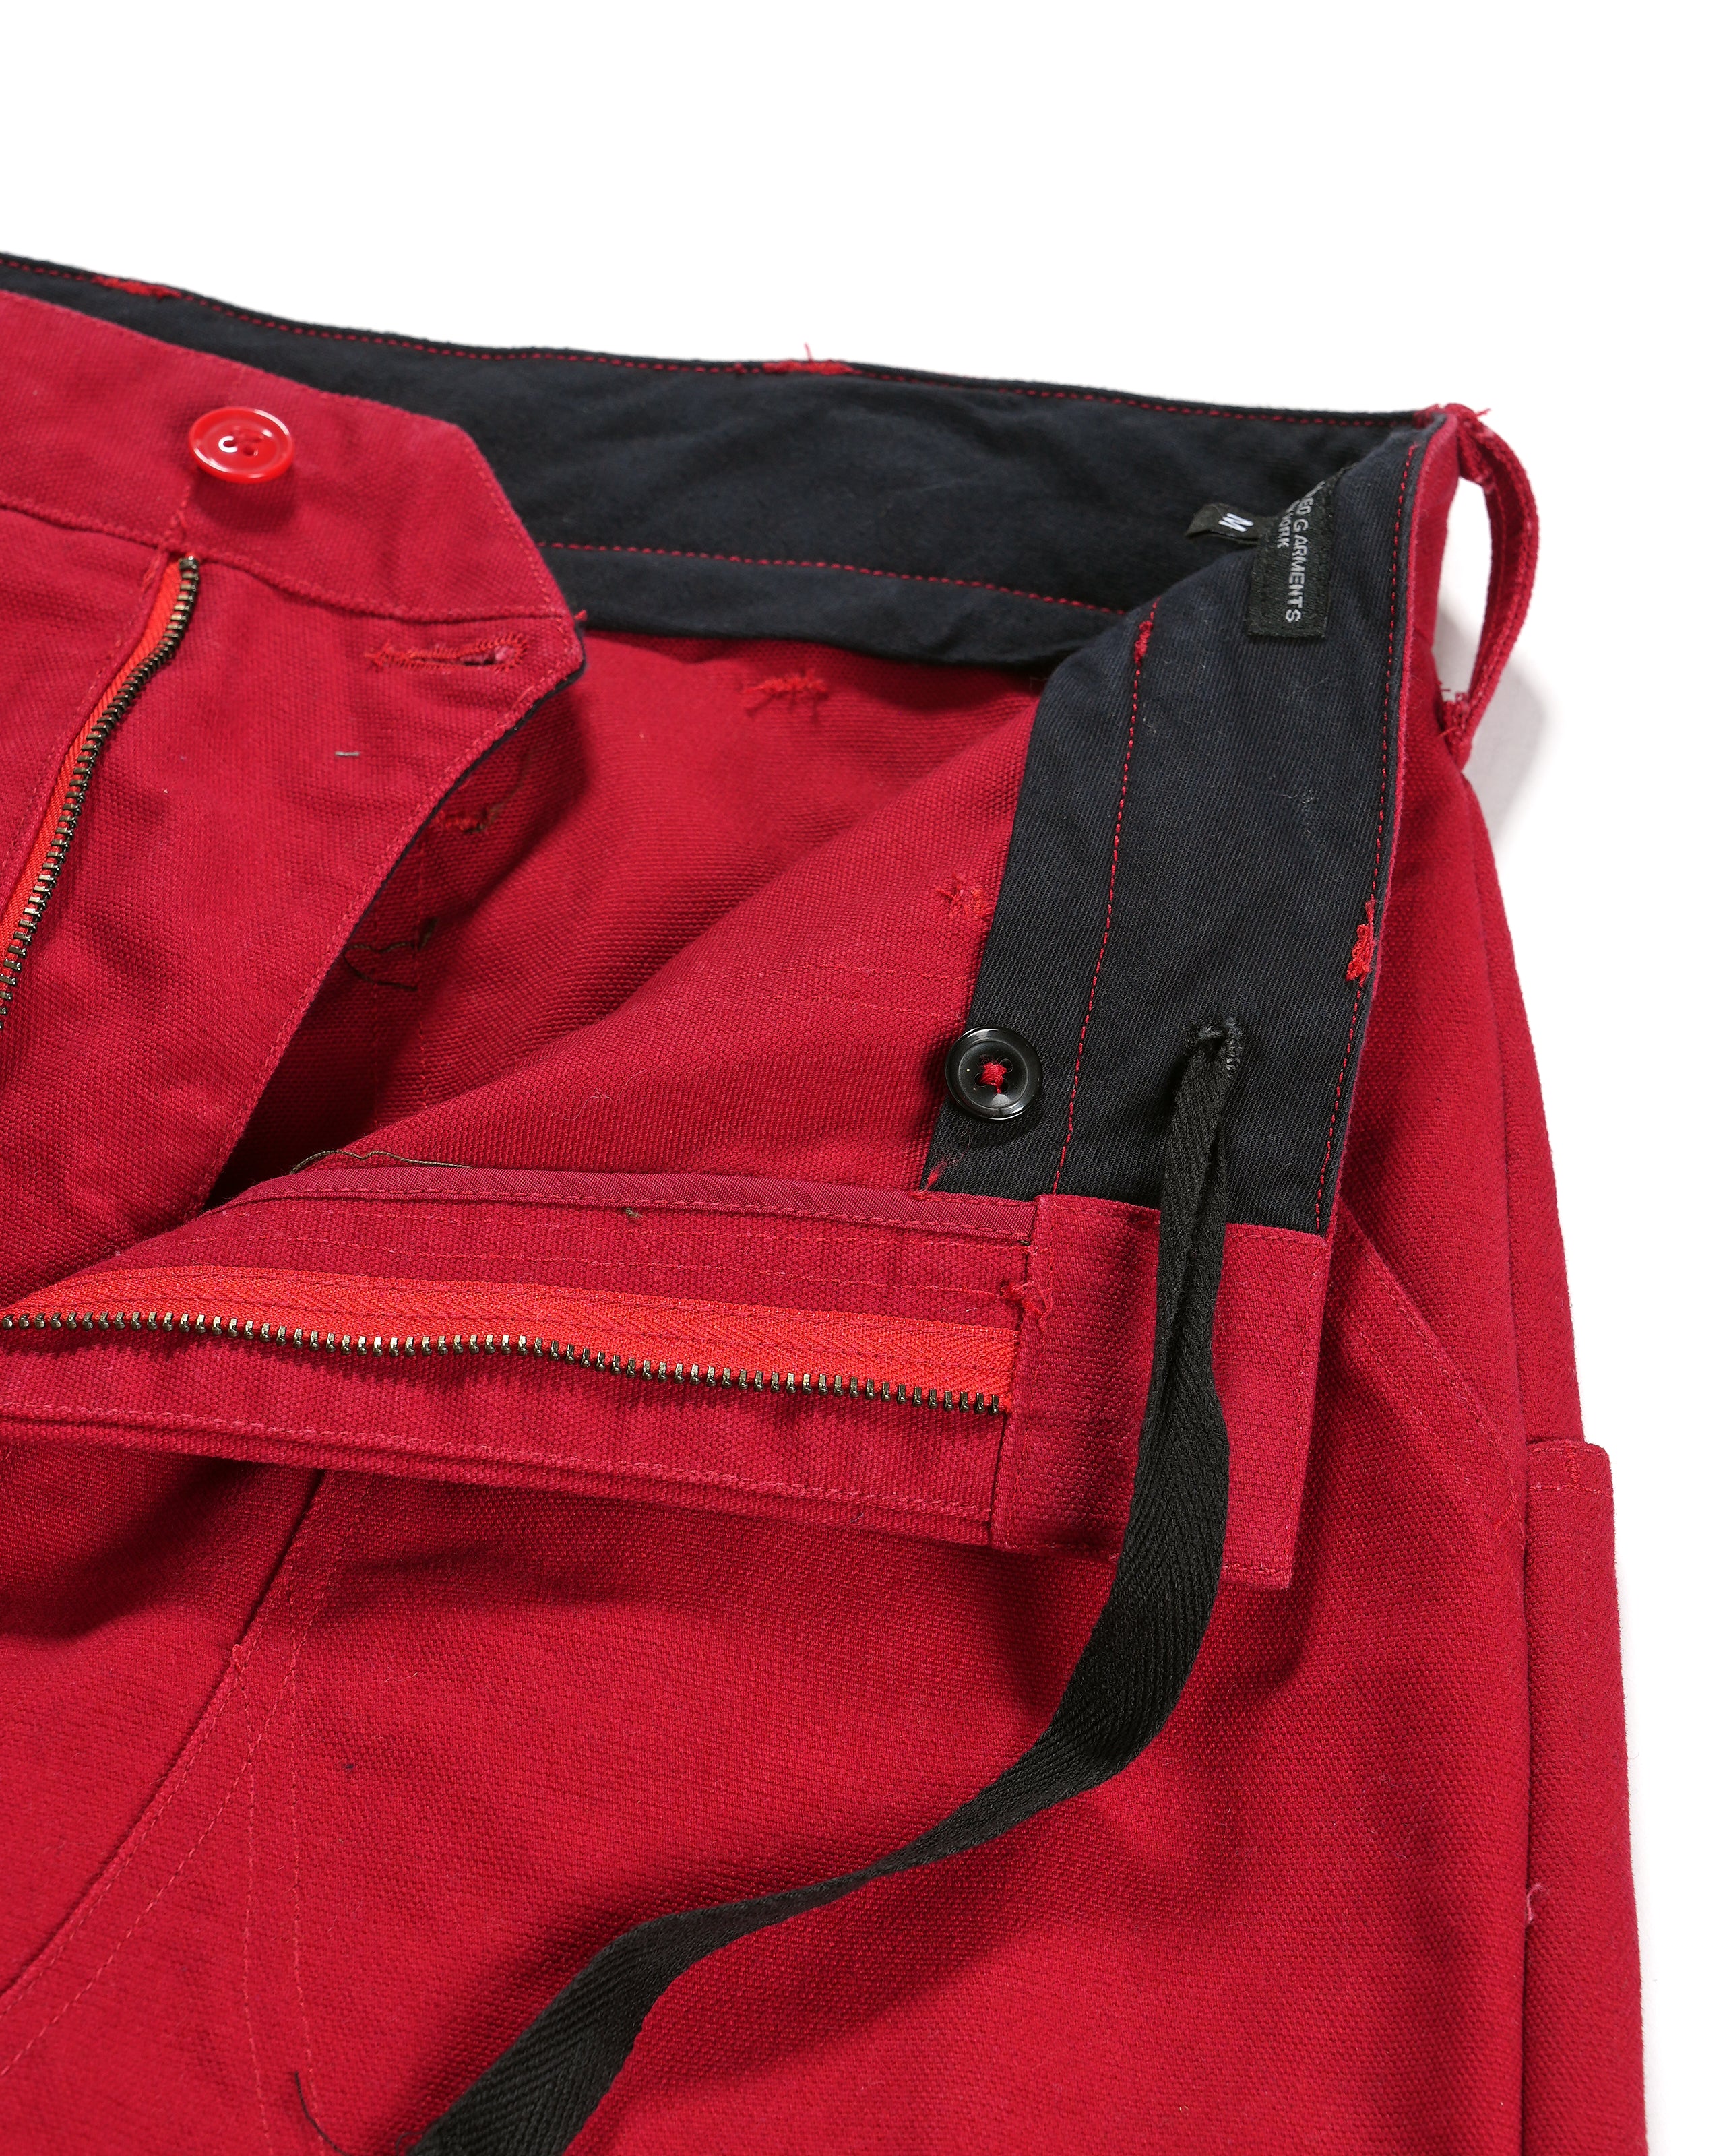 Climbing Pant - Red 12oz Duck Canvas